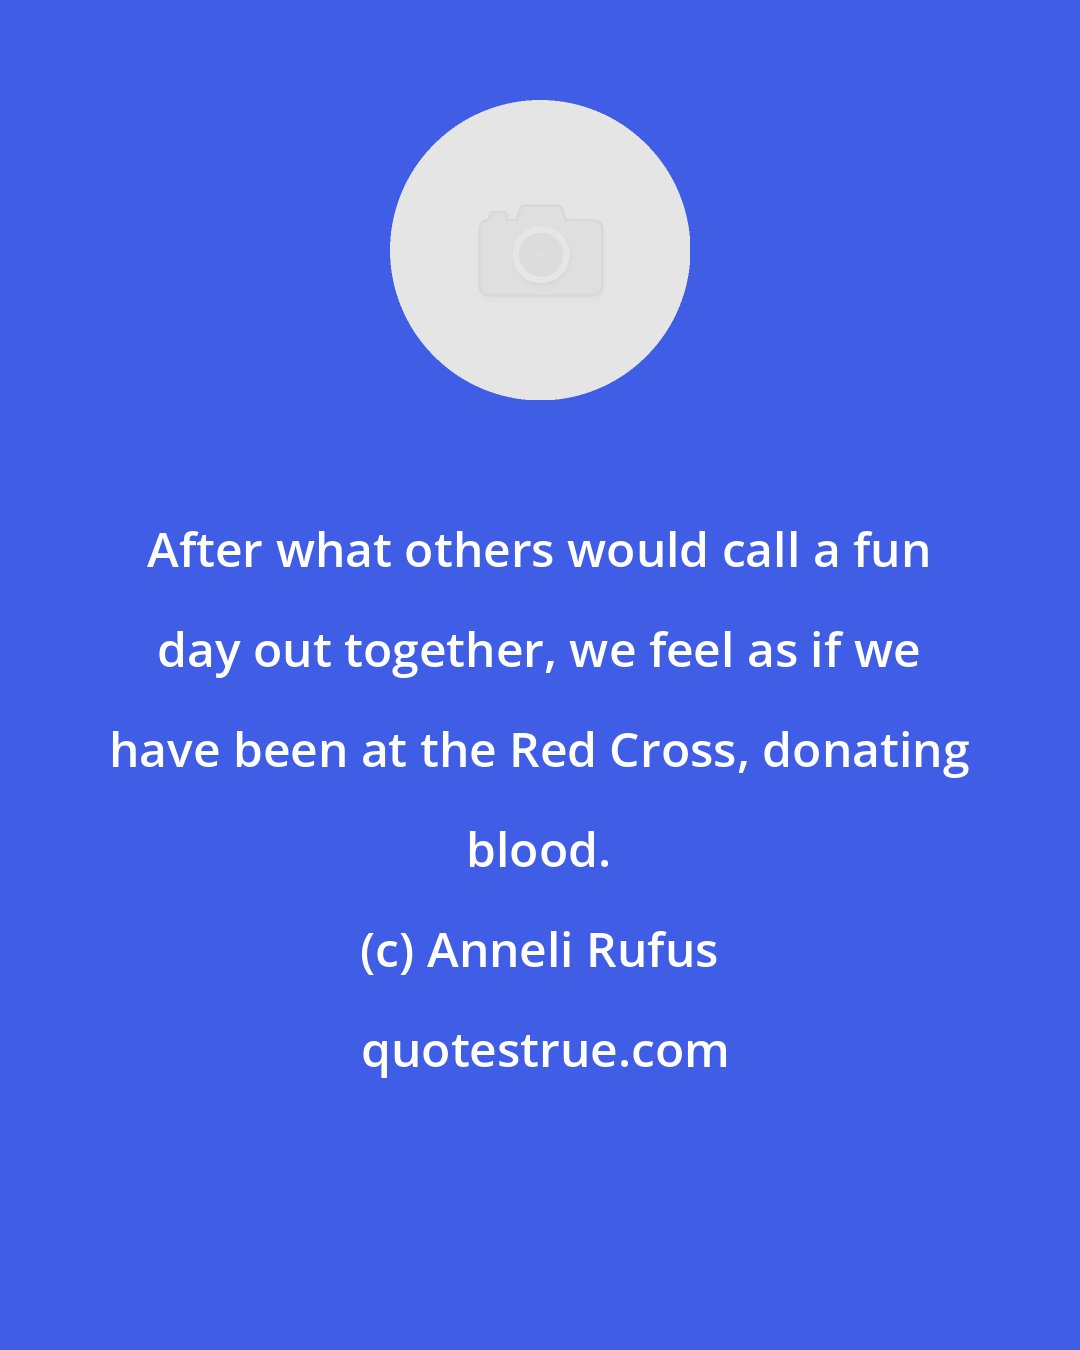 Anneli Rufus: After what others would call a fun day out together, we feel as if we have been at the Red Cross, donating blood.